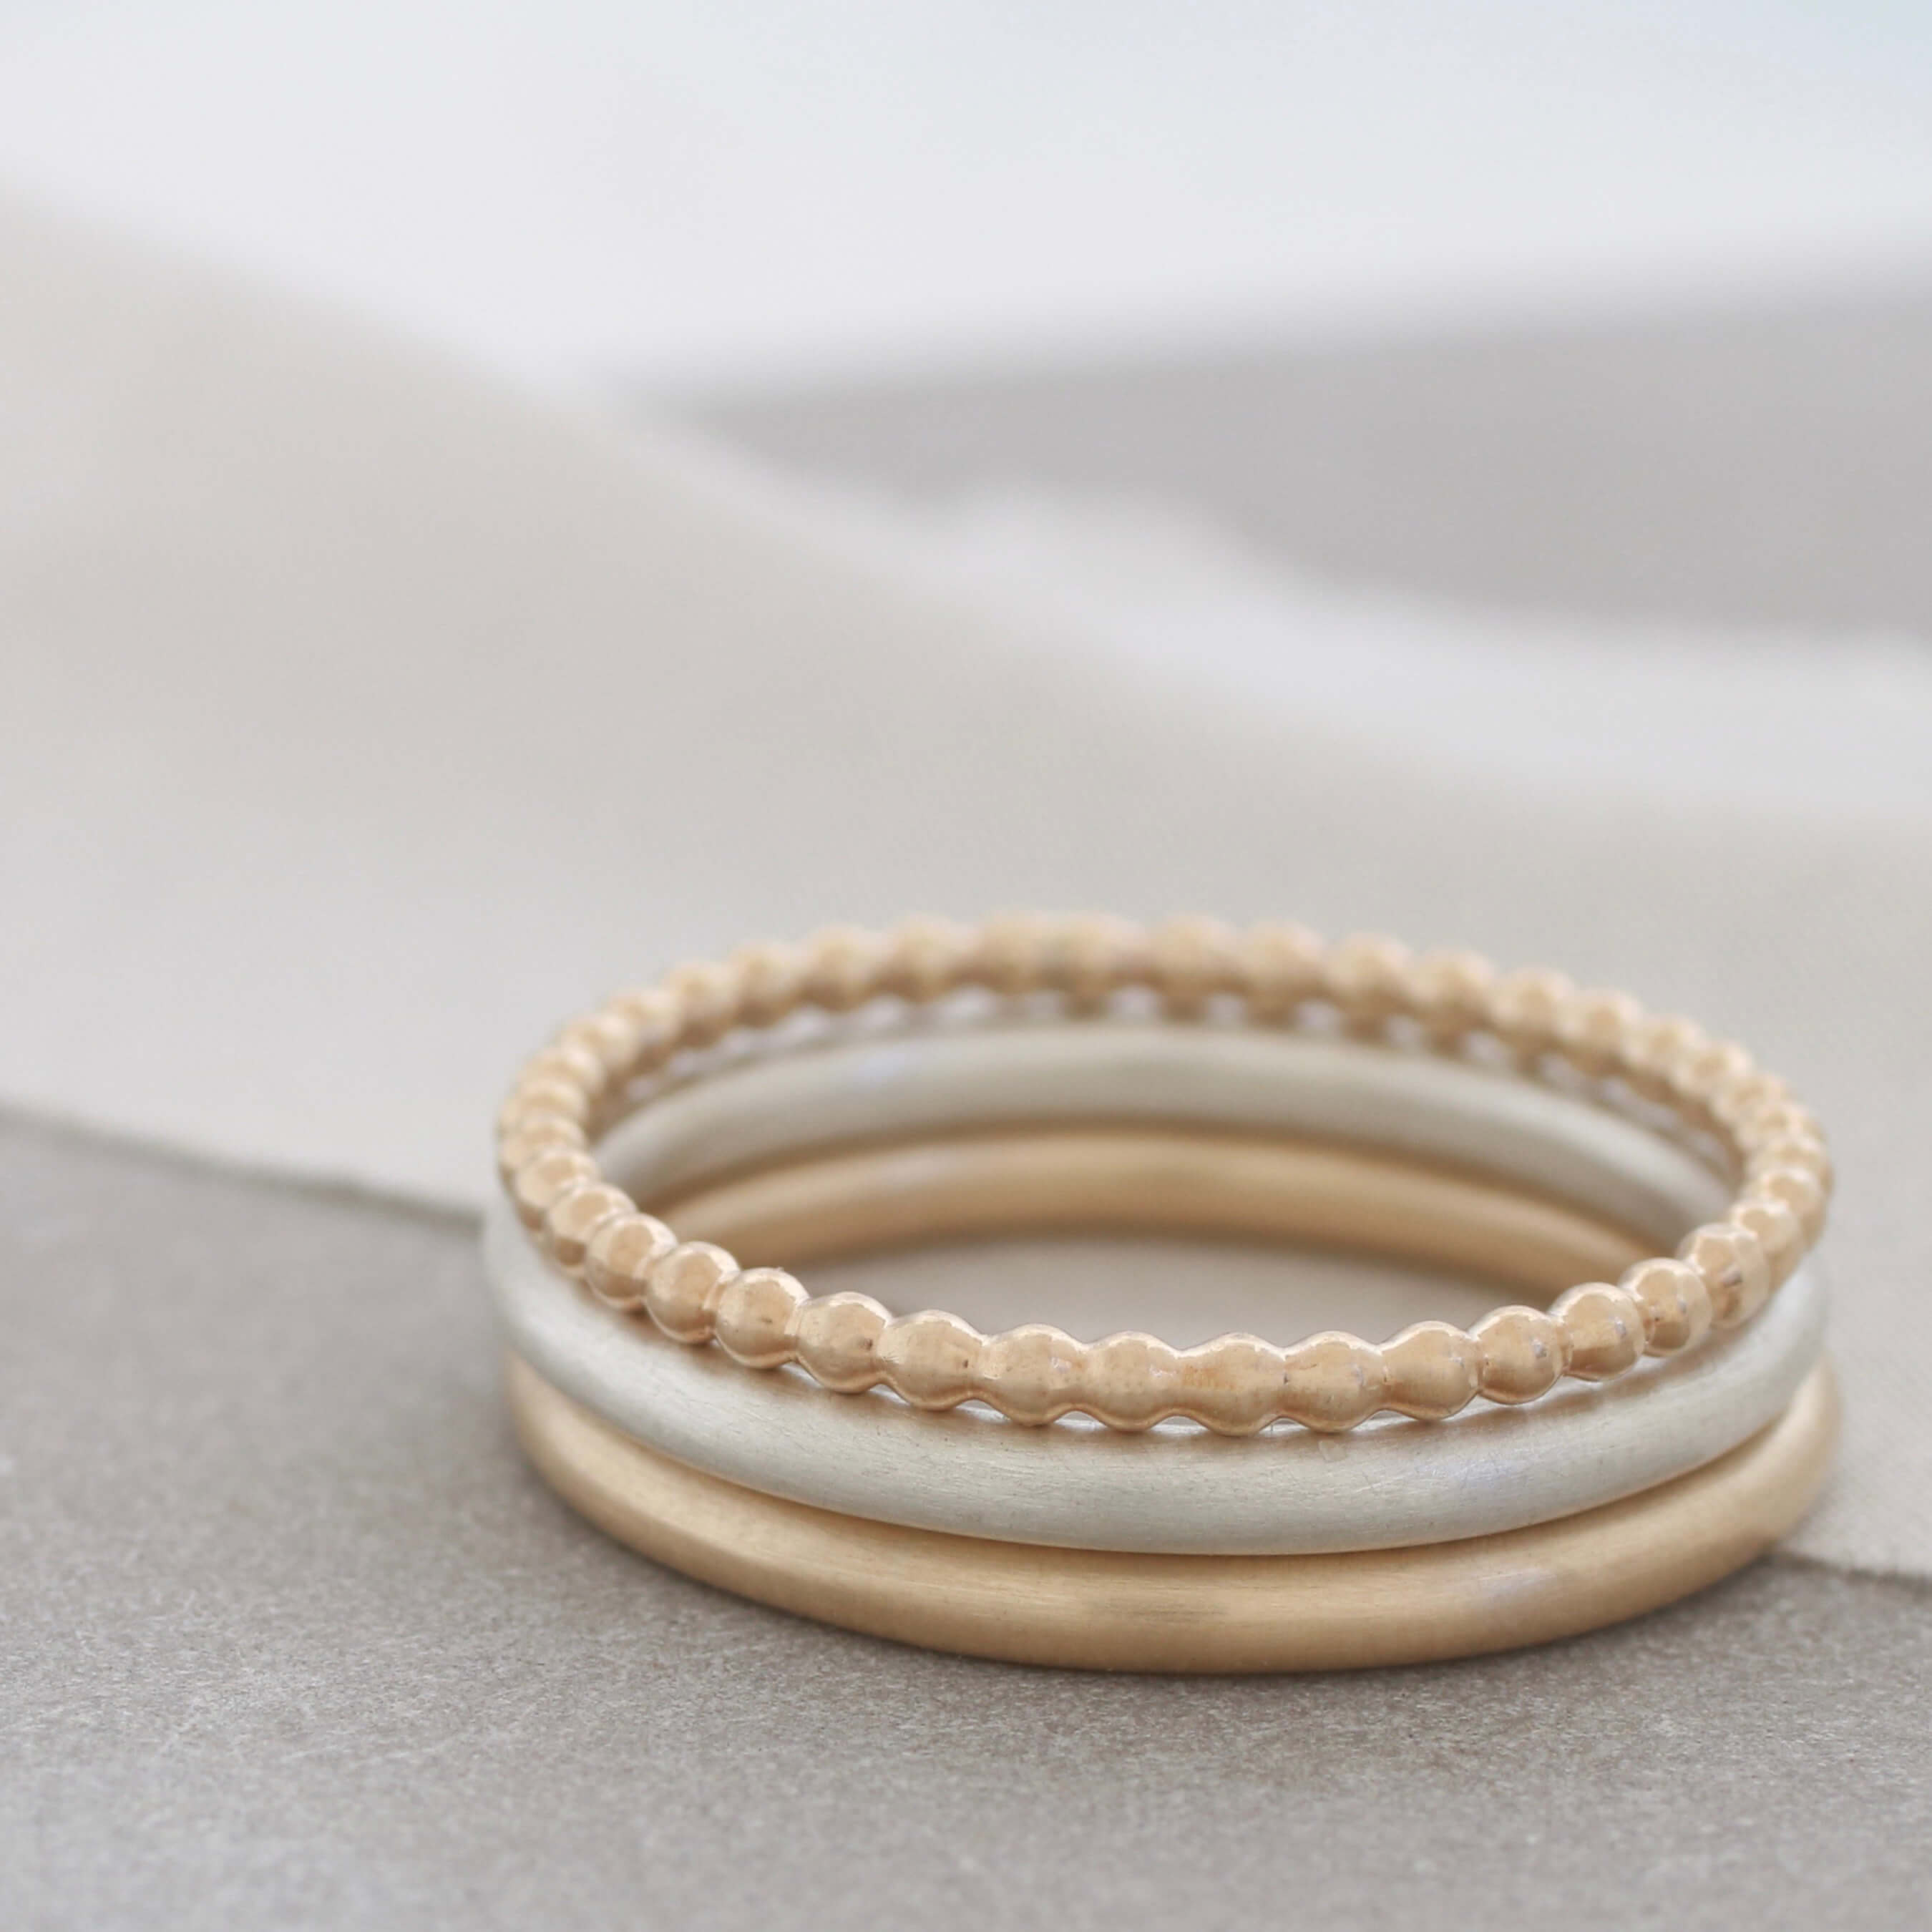 Gold and silver stackable rings